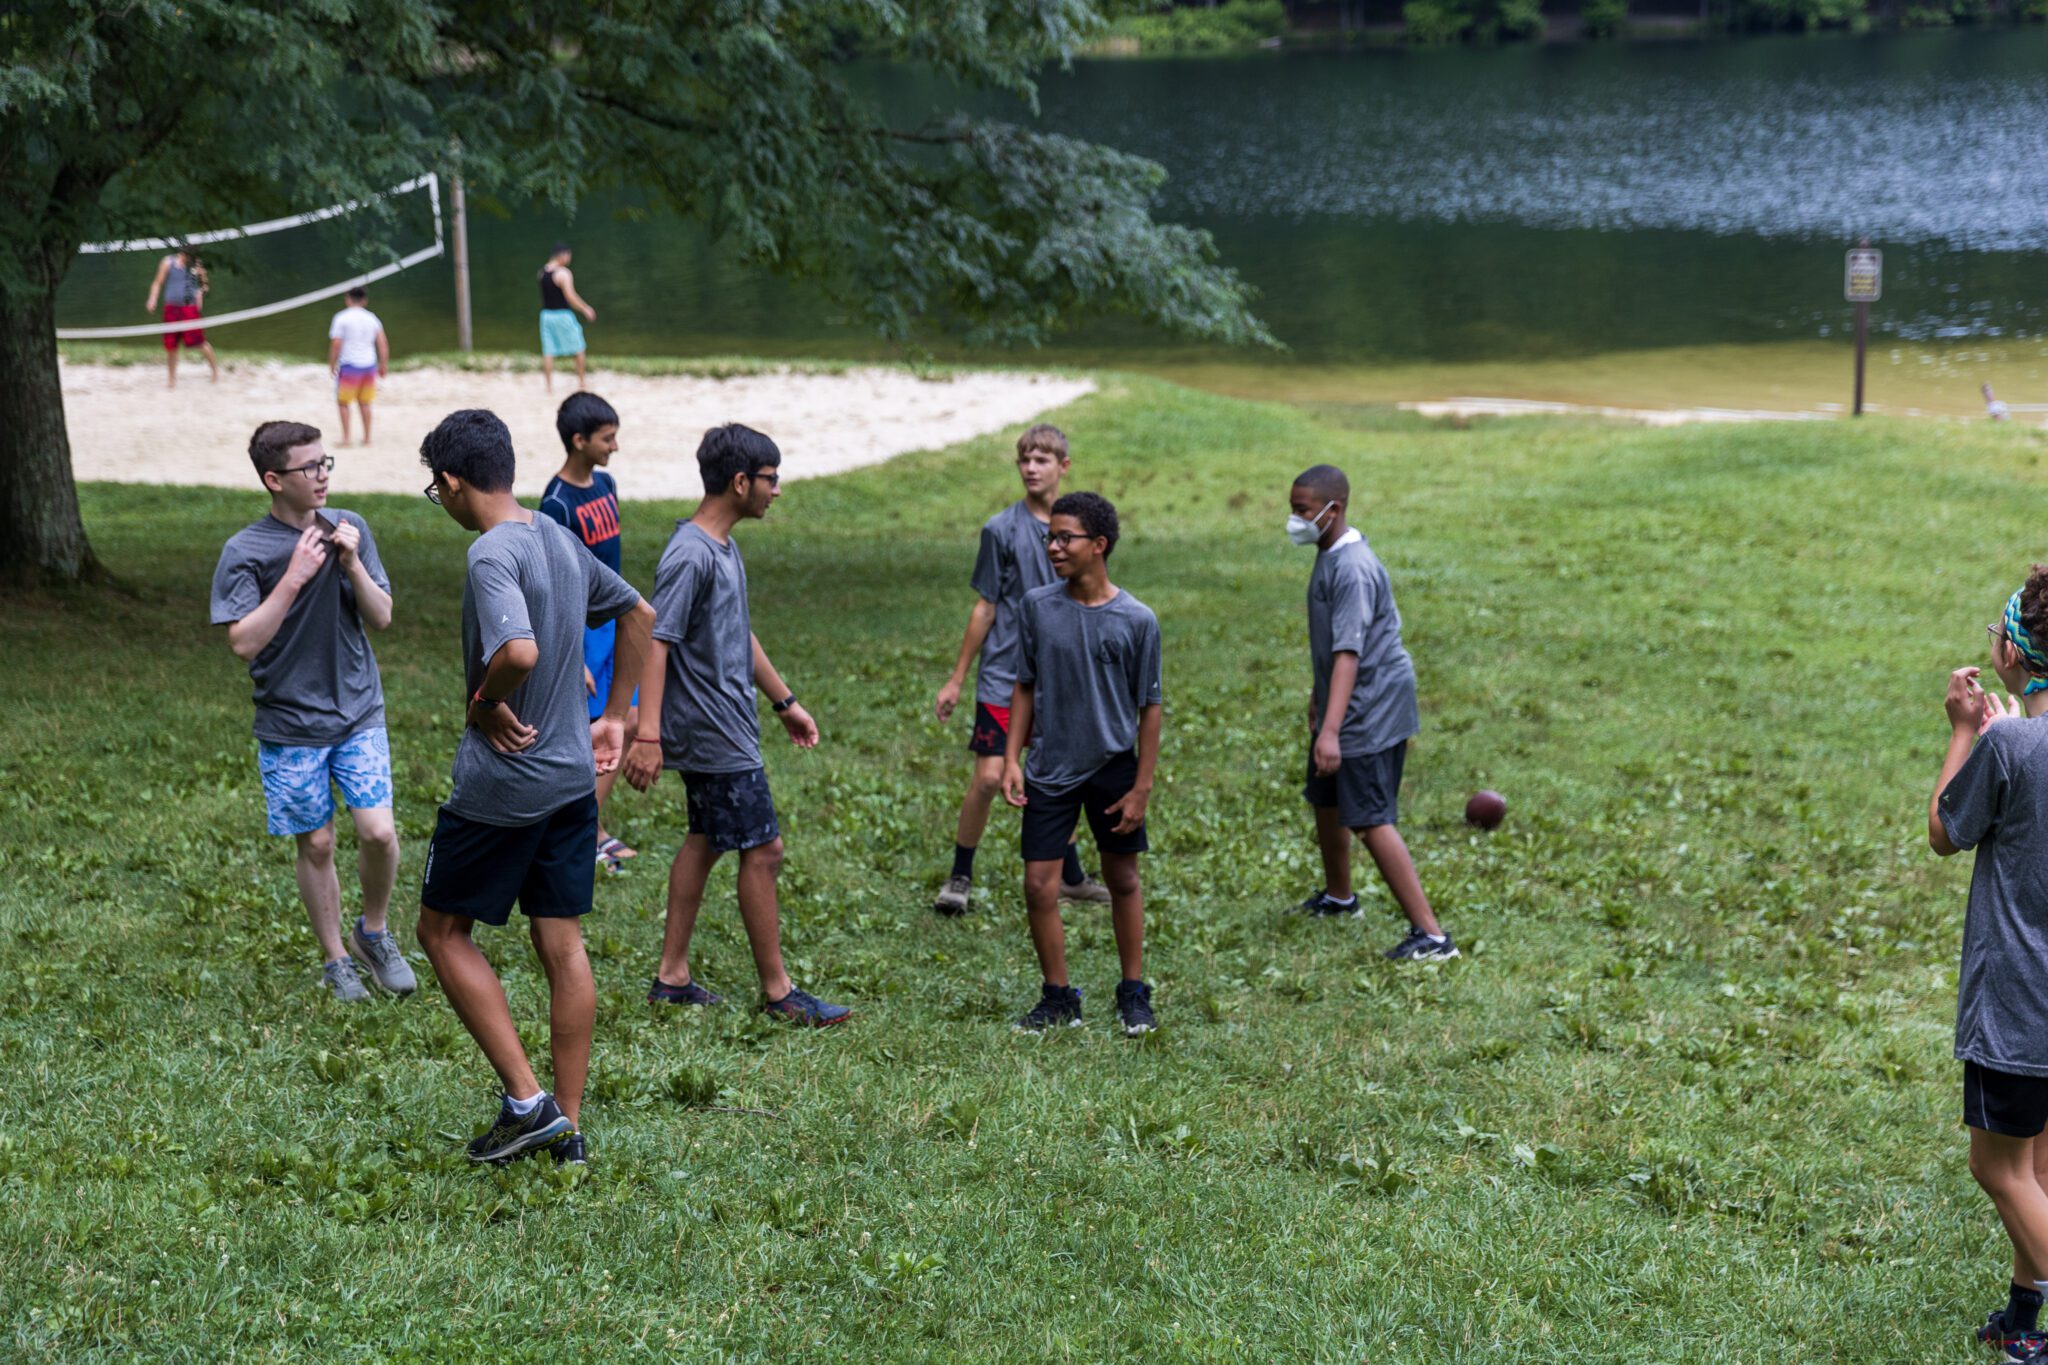 A group of boys participating in the P.L.E.D.G.E. Leadership Program playing a game of frisbee on a grassy field.